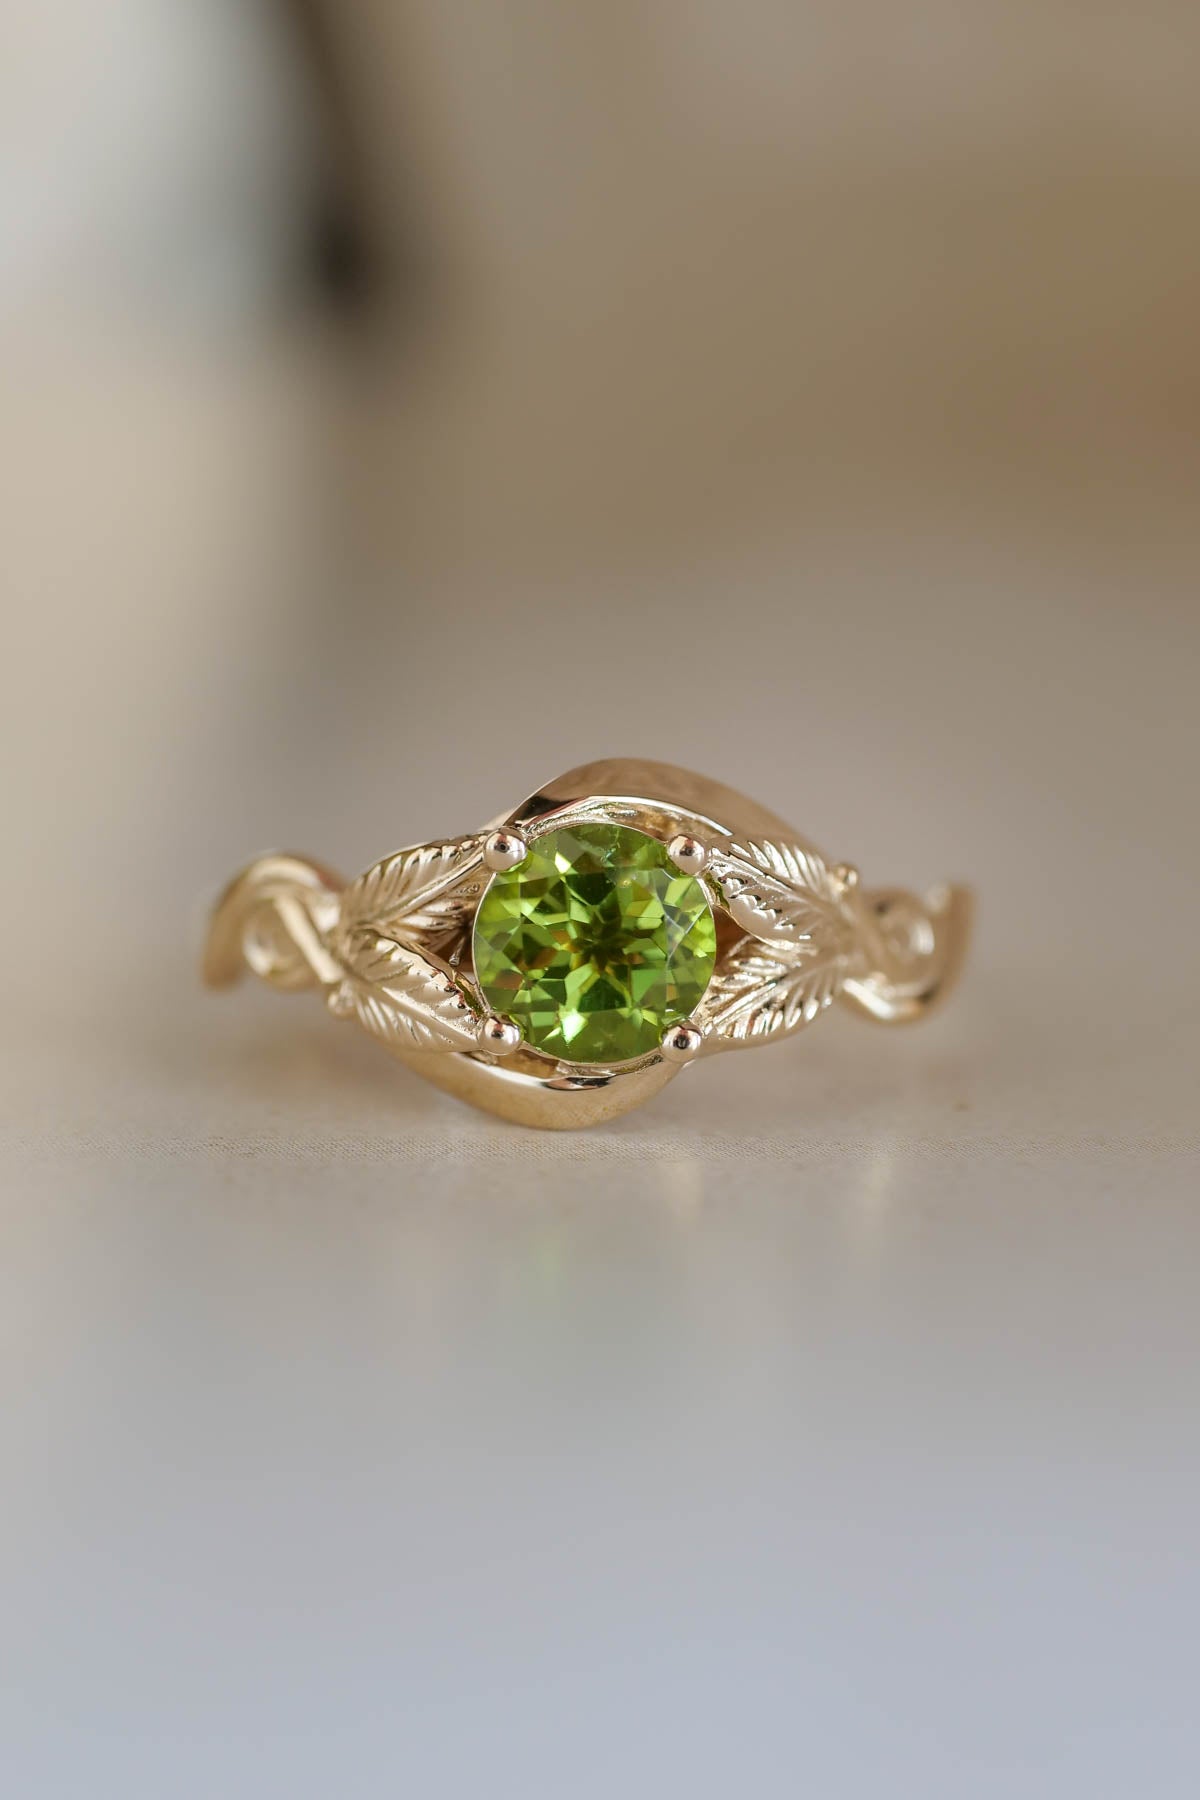 Nature proposal ring with peridot, leaves ring / Azalea - Eden Garden Jewelry™